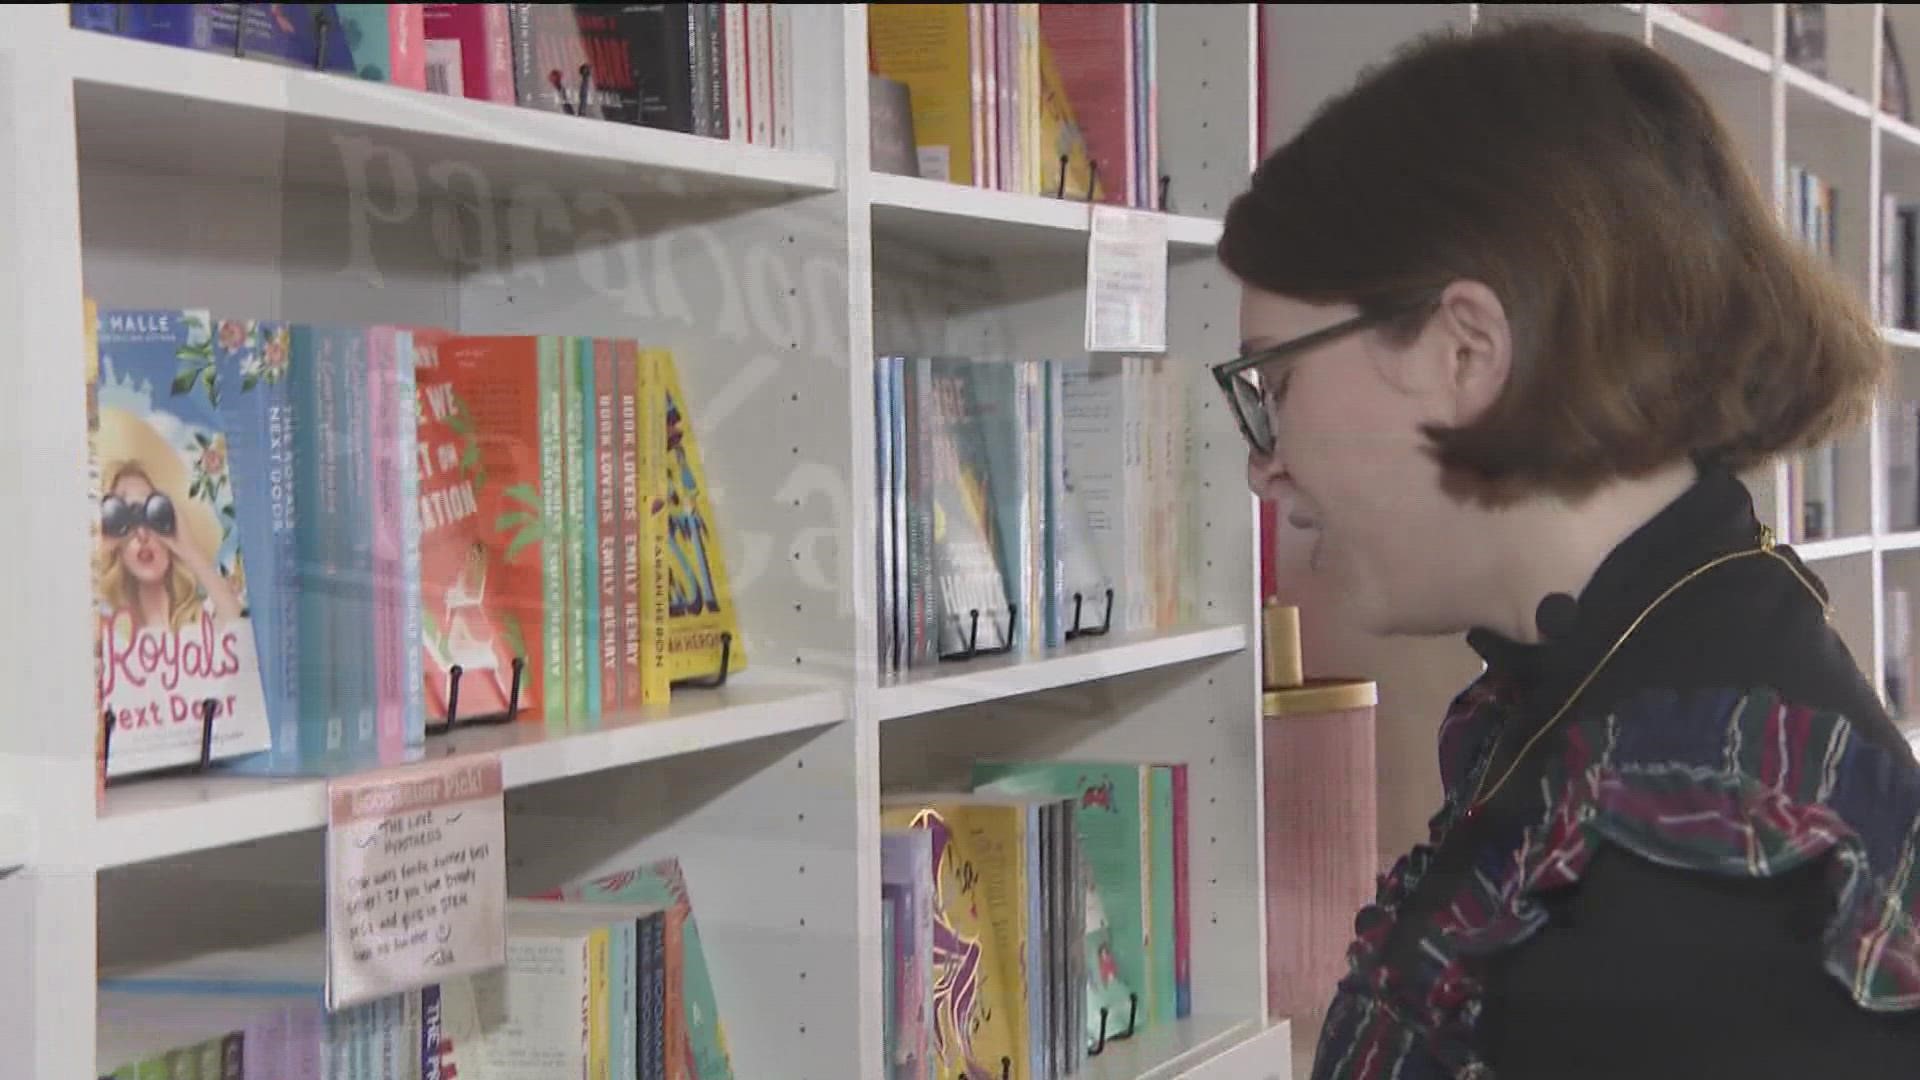 San Diego's first all romance bookshop opens its doors in North Park.